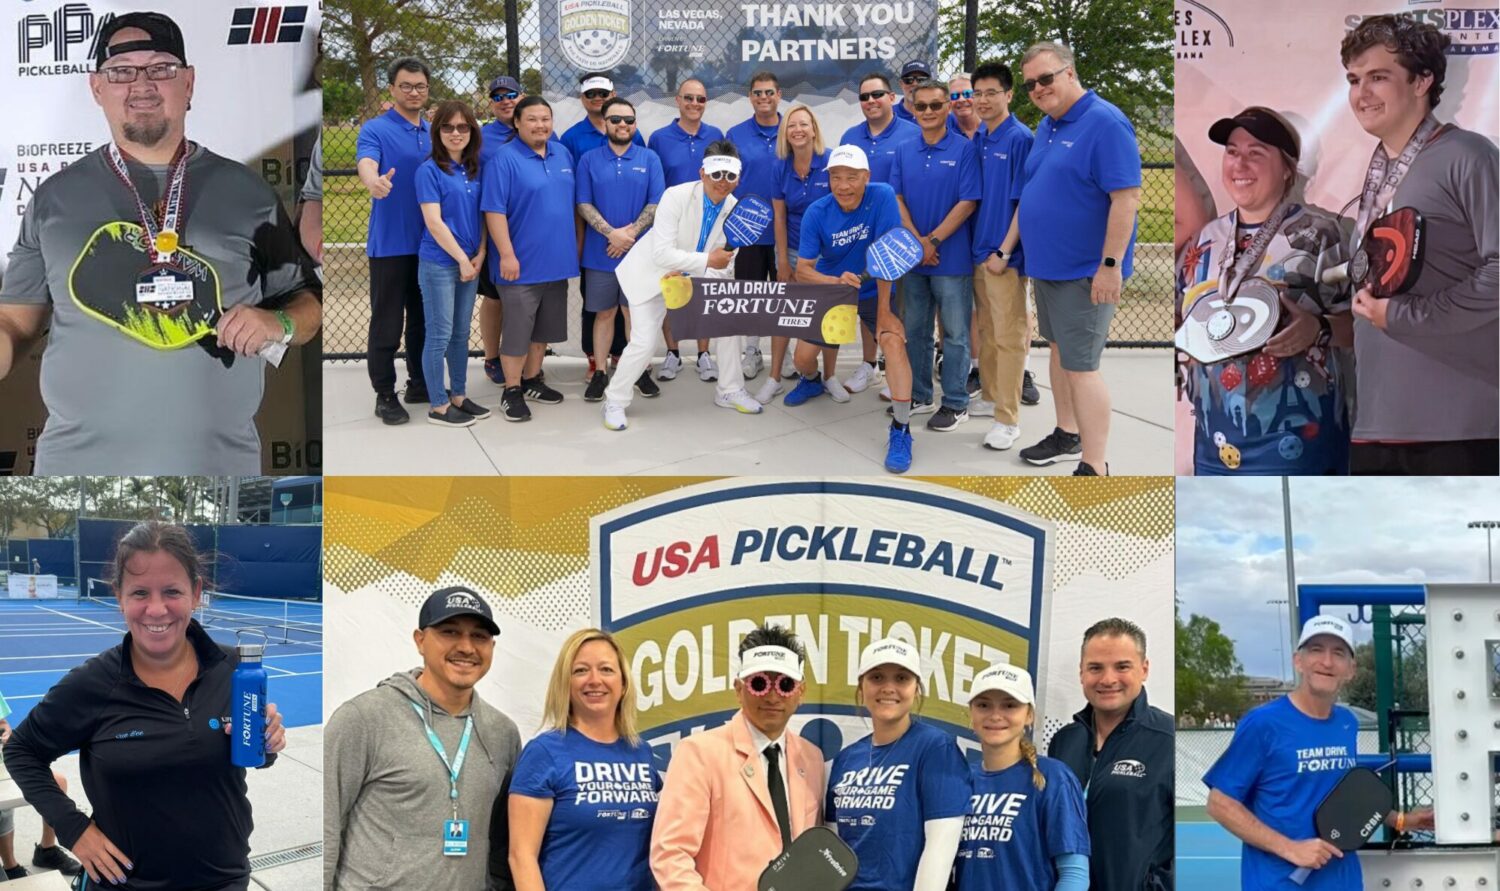 FORTUNE TIRES AND USA PICKLEBALL UNVEIL TEAM DRIVE PROGRAM - Fortune Tires USA